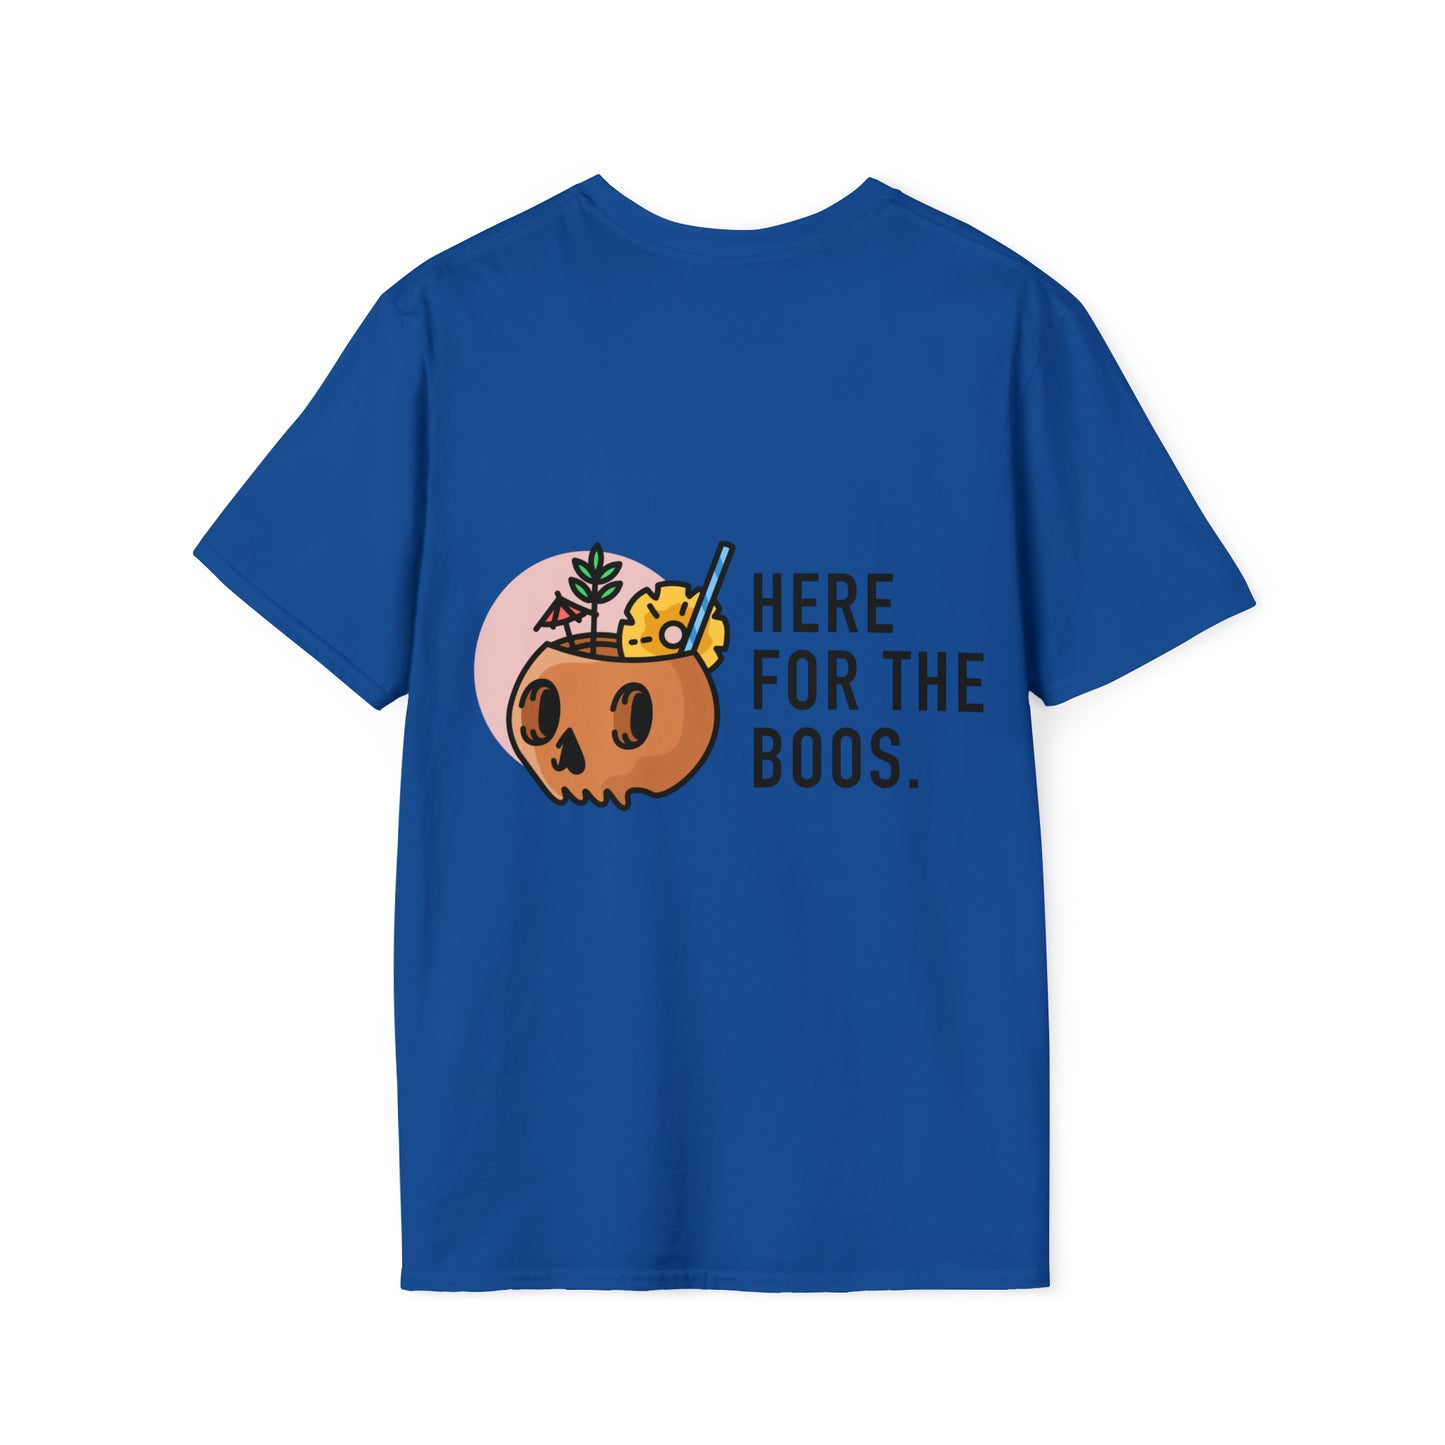 Halloqueen Women's Shirt for Halloween | Here For The Boos